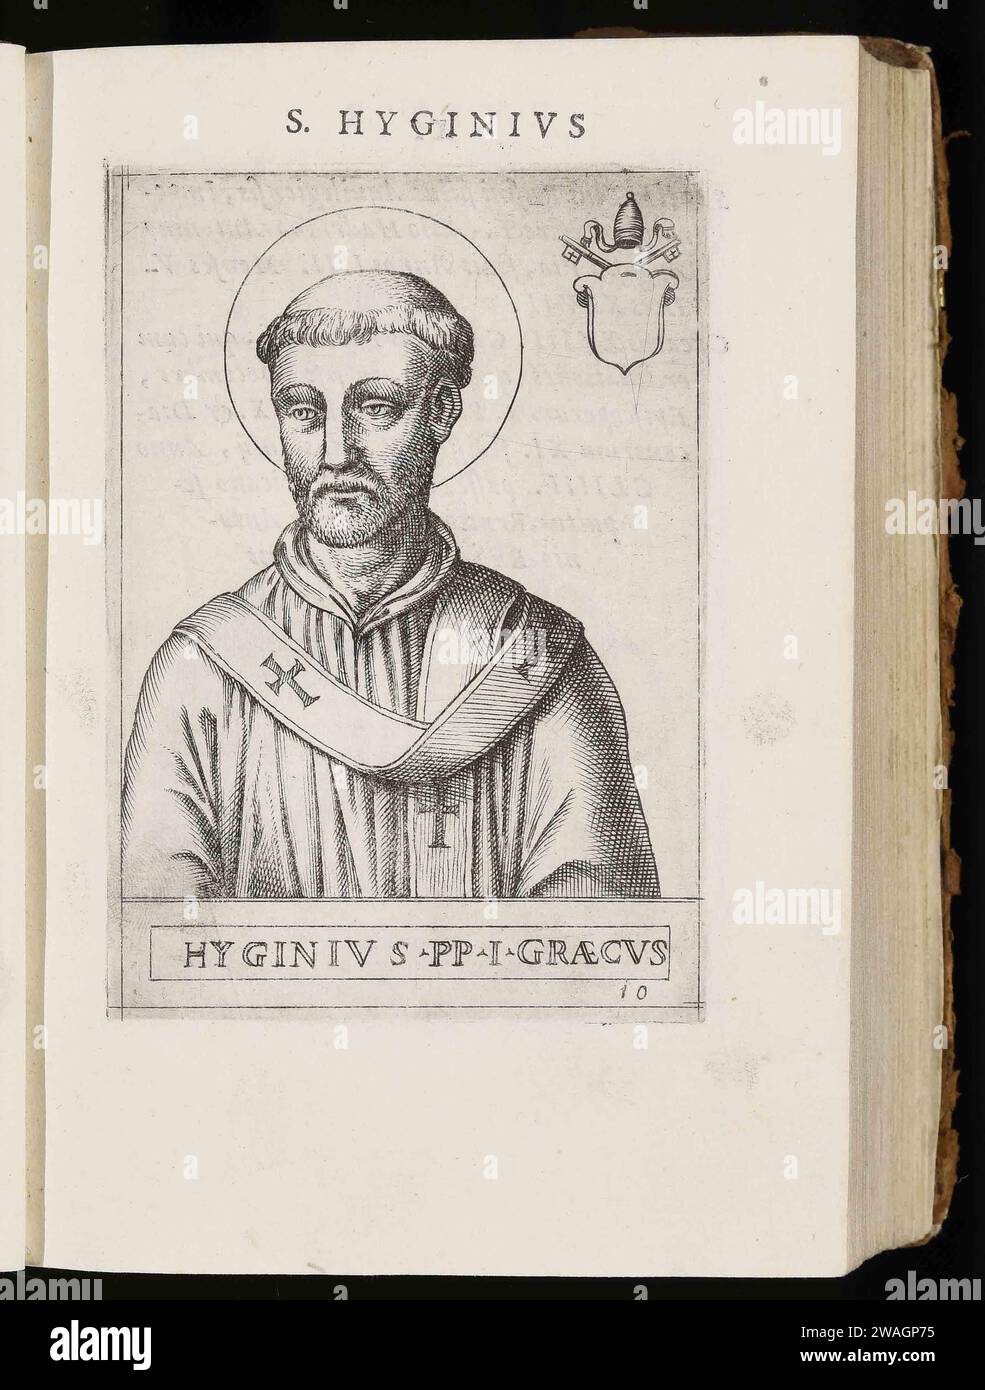 A 1580 engraving of Pope Hyginus, who was pontiff from AD136 to AD140. He was the ninth pope. He was Greek and it was he that introduced the idea of godparents to help baptised children during their Christian life and duties. Stock Photo